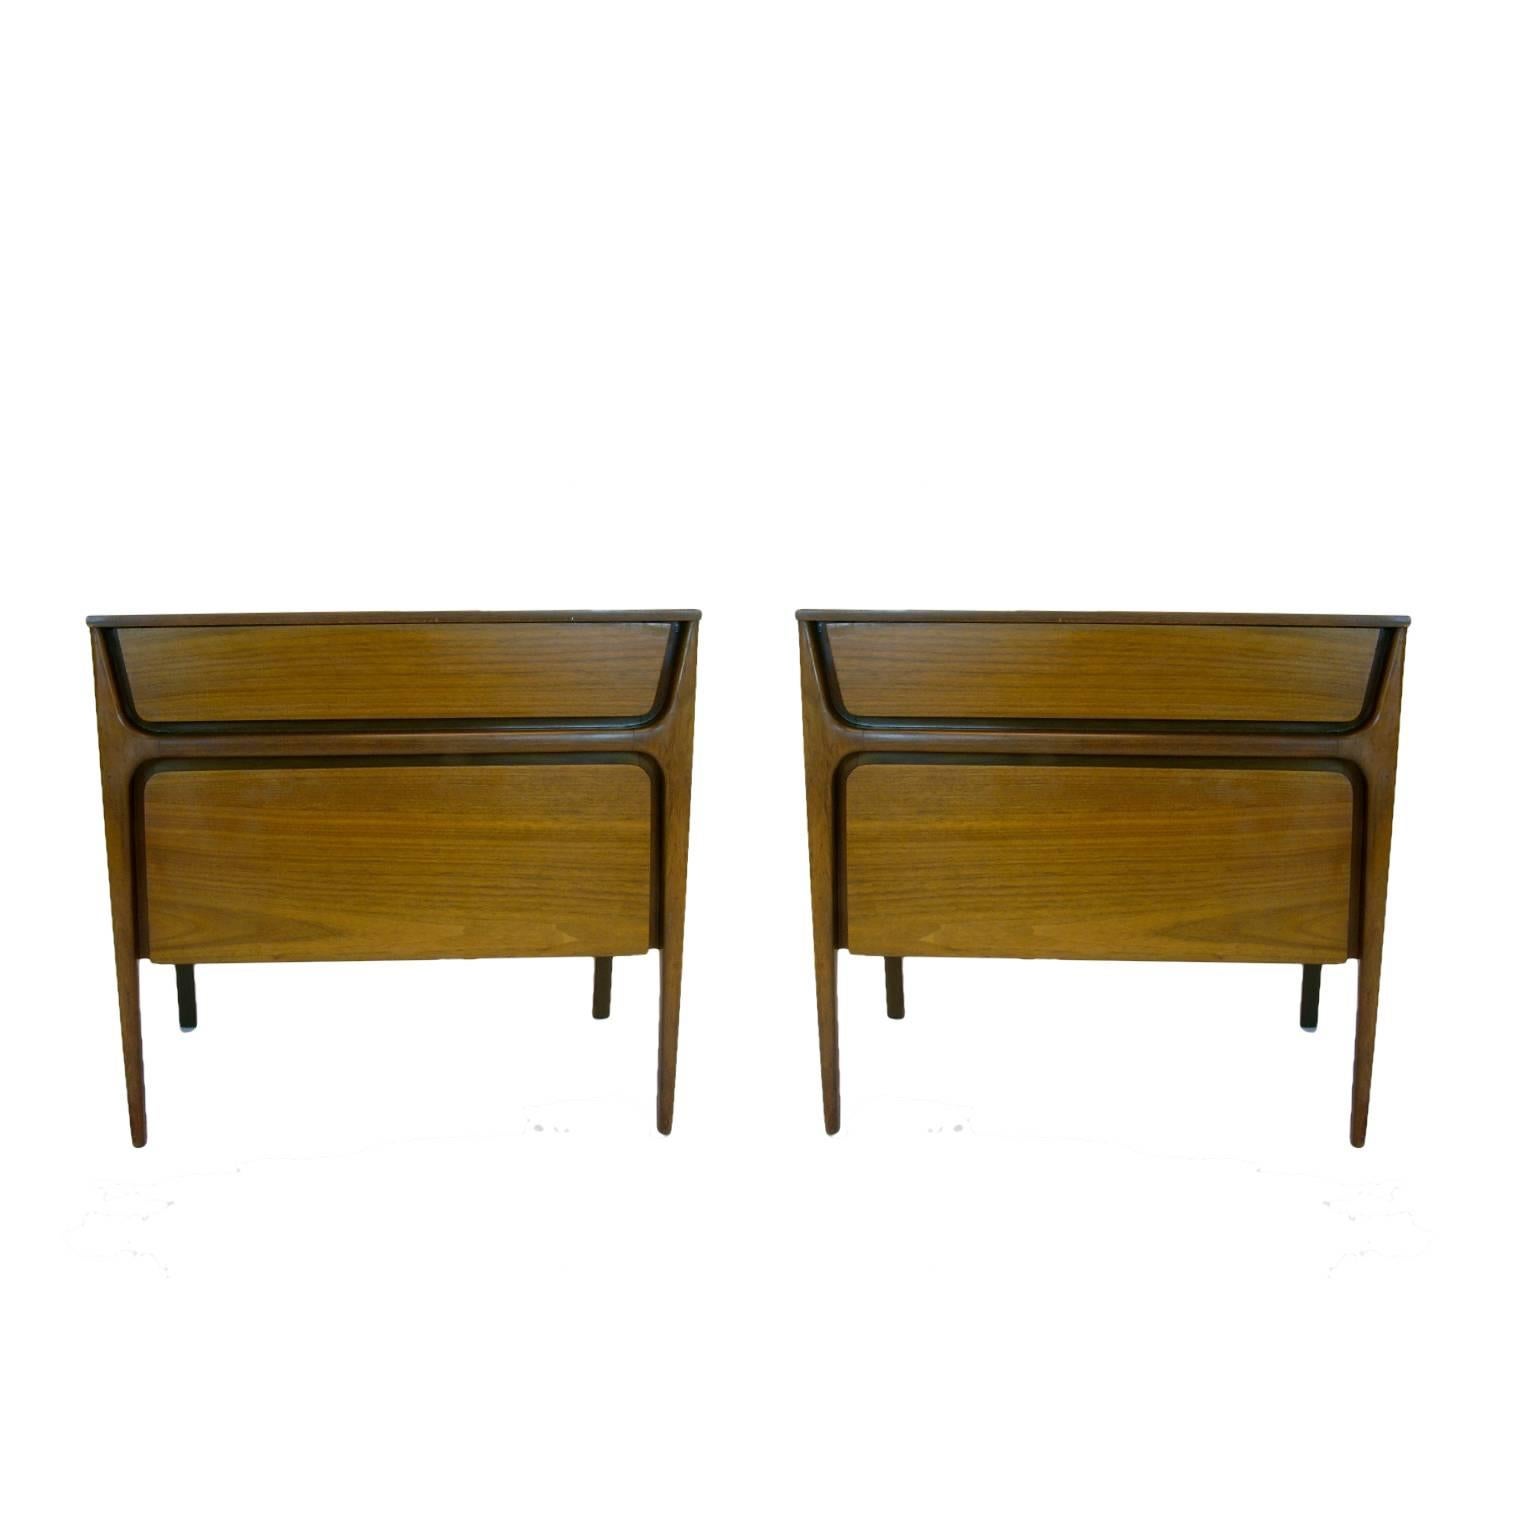 Pair of sleek 1950s sculptural nightstands with one small drawer on top and bottom portion drops down for storage. Condition is original and ok, but not perfect.